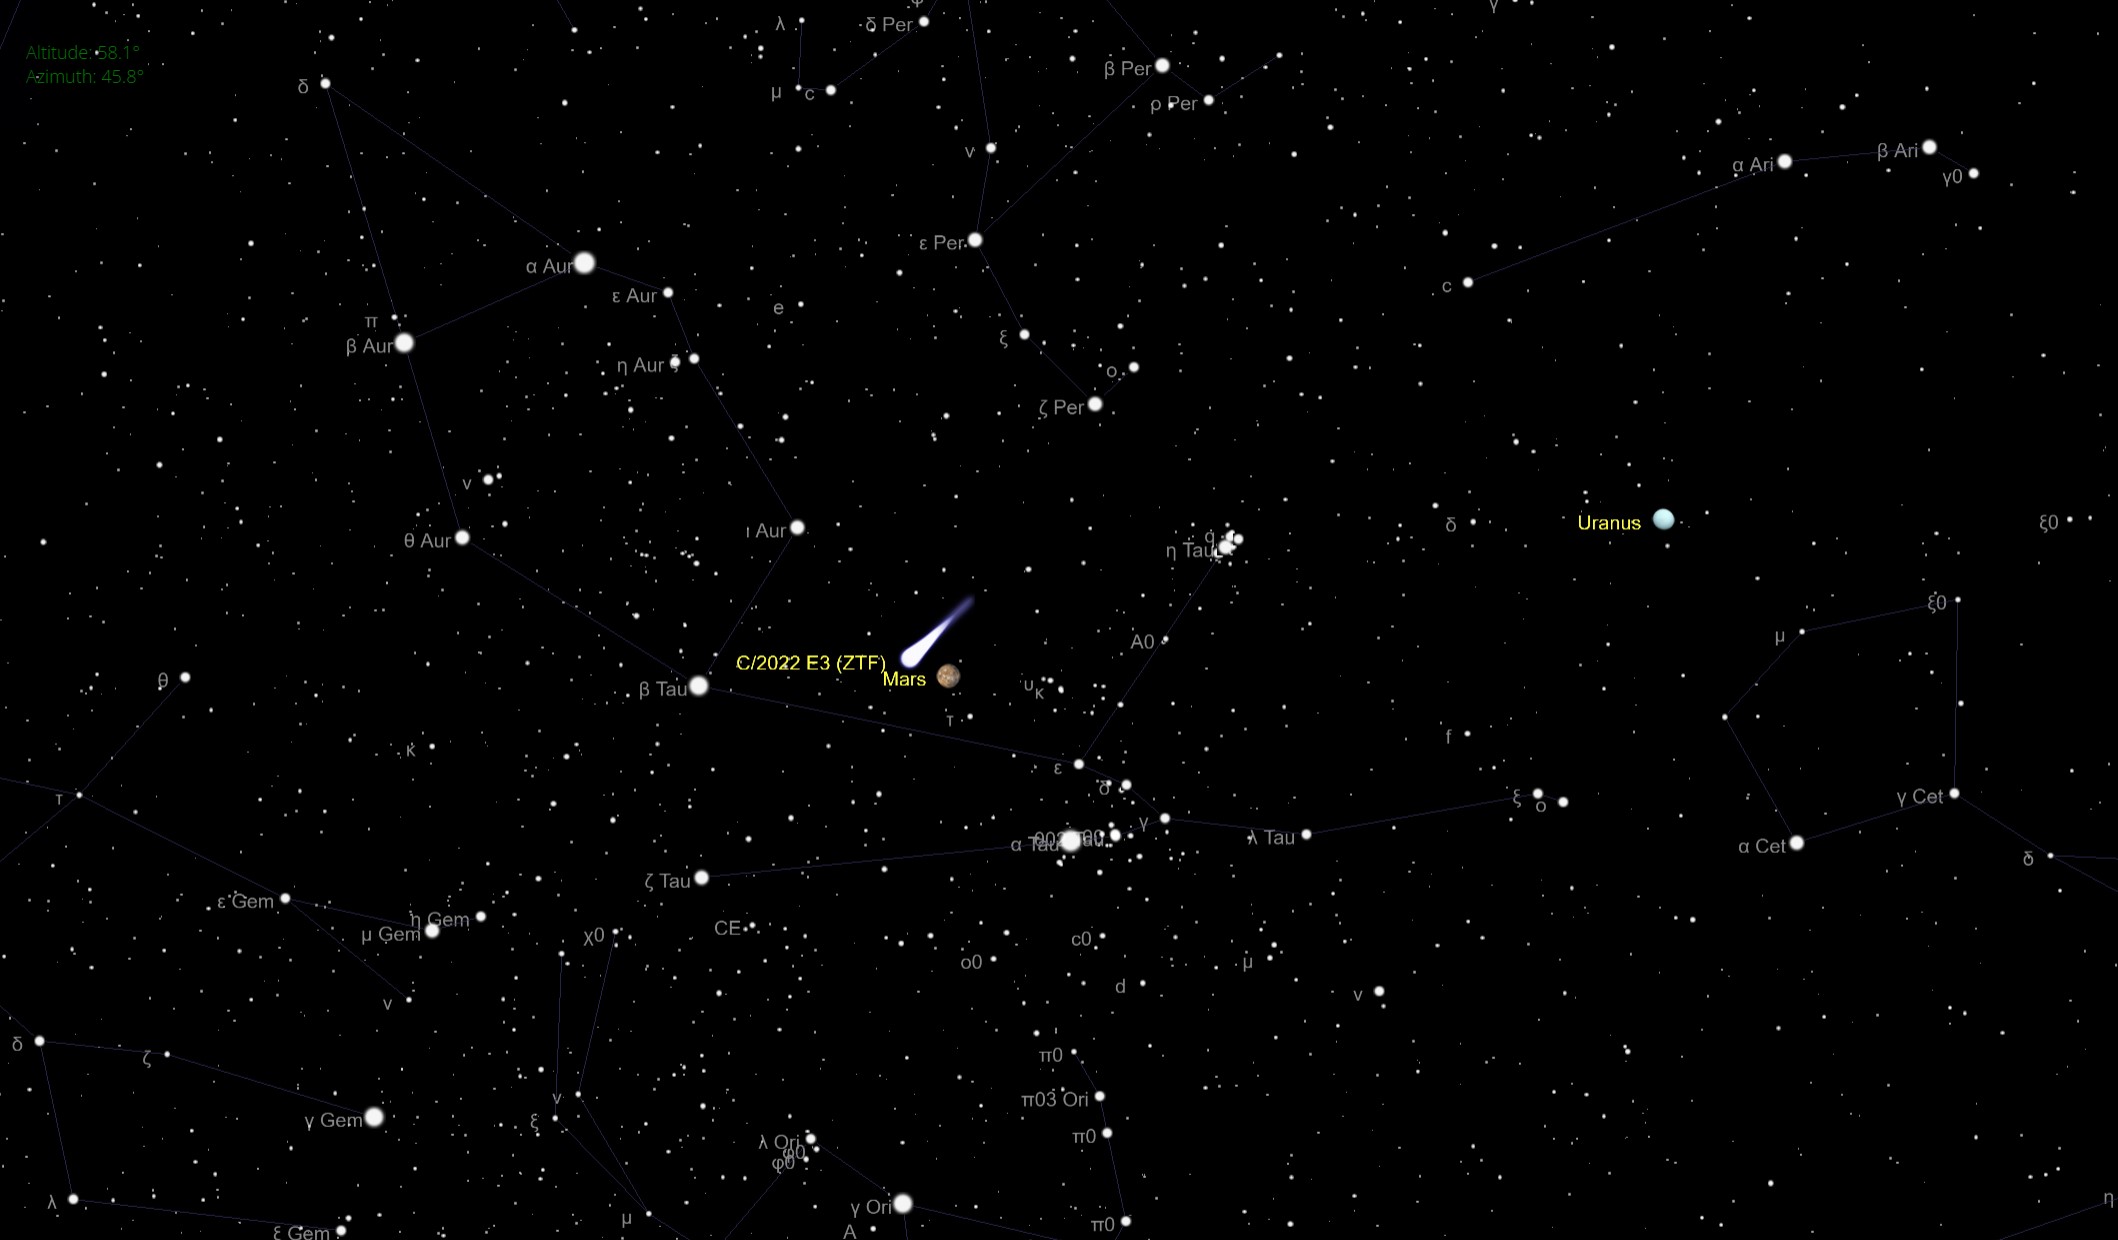 An illustration of the night sky on Feb. 10 facing north from New York City at 6:45 p.m. EST (2345 GMT), showing comet C/2022 E3 ZTF in close proximity to Mars.